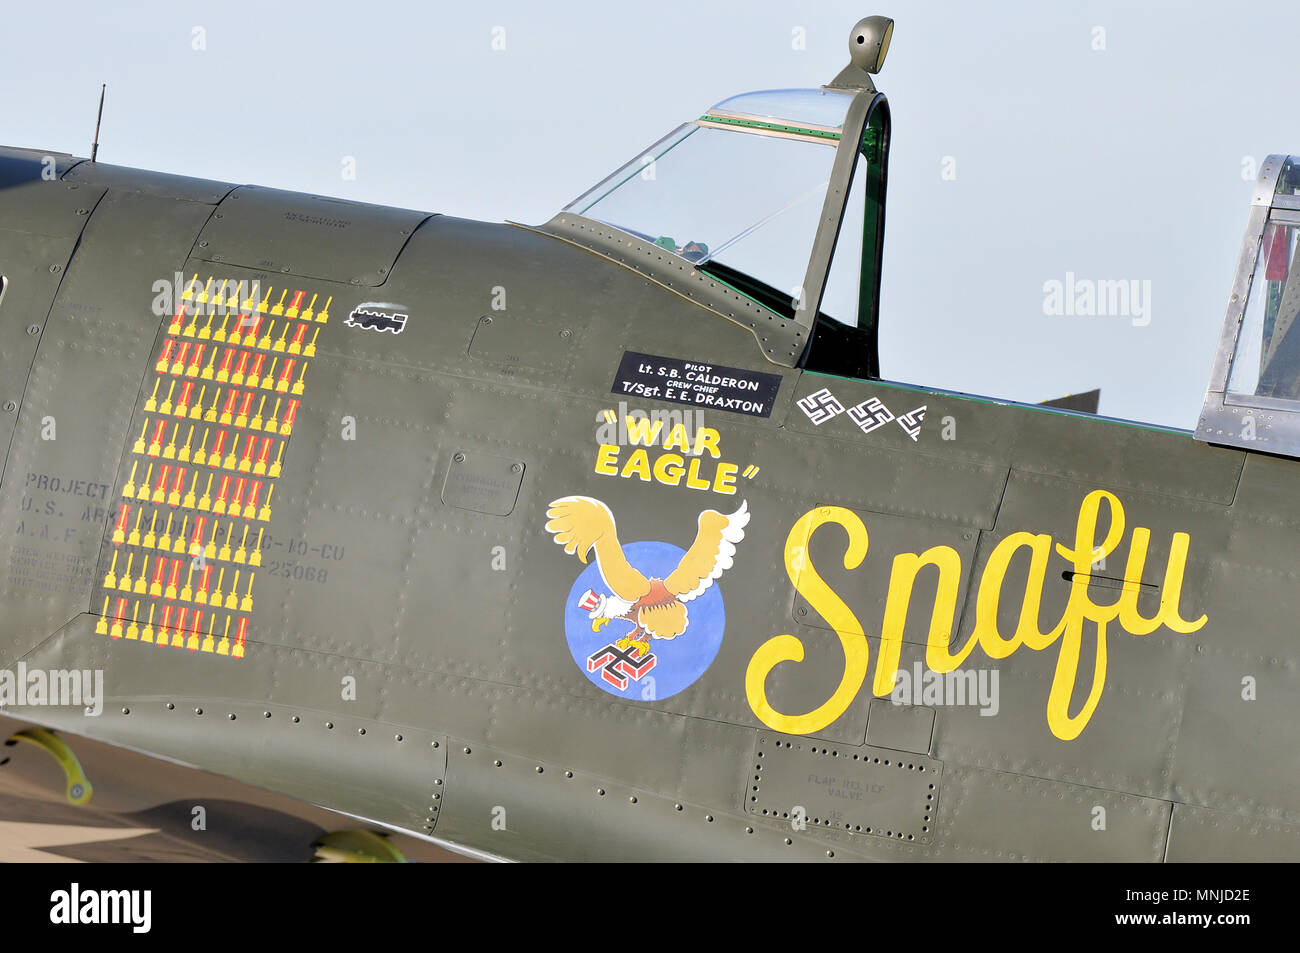 Republic P-47 Thunderbolt named Snafu, War Eagle World War Two, Second World War fighter plane rolled out after painting. War Eagle artwork Stock Photo